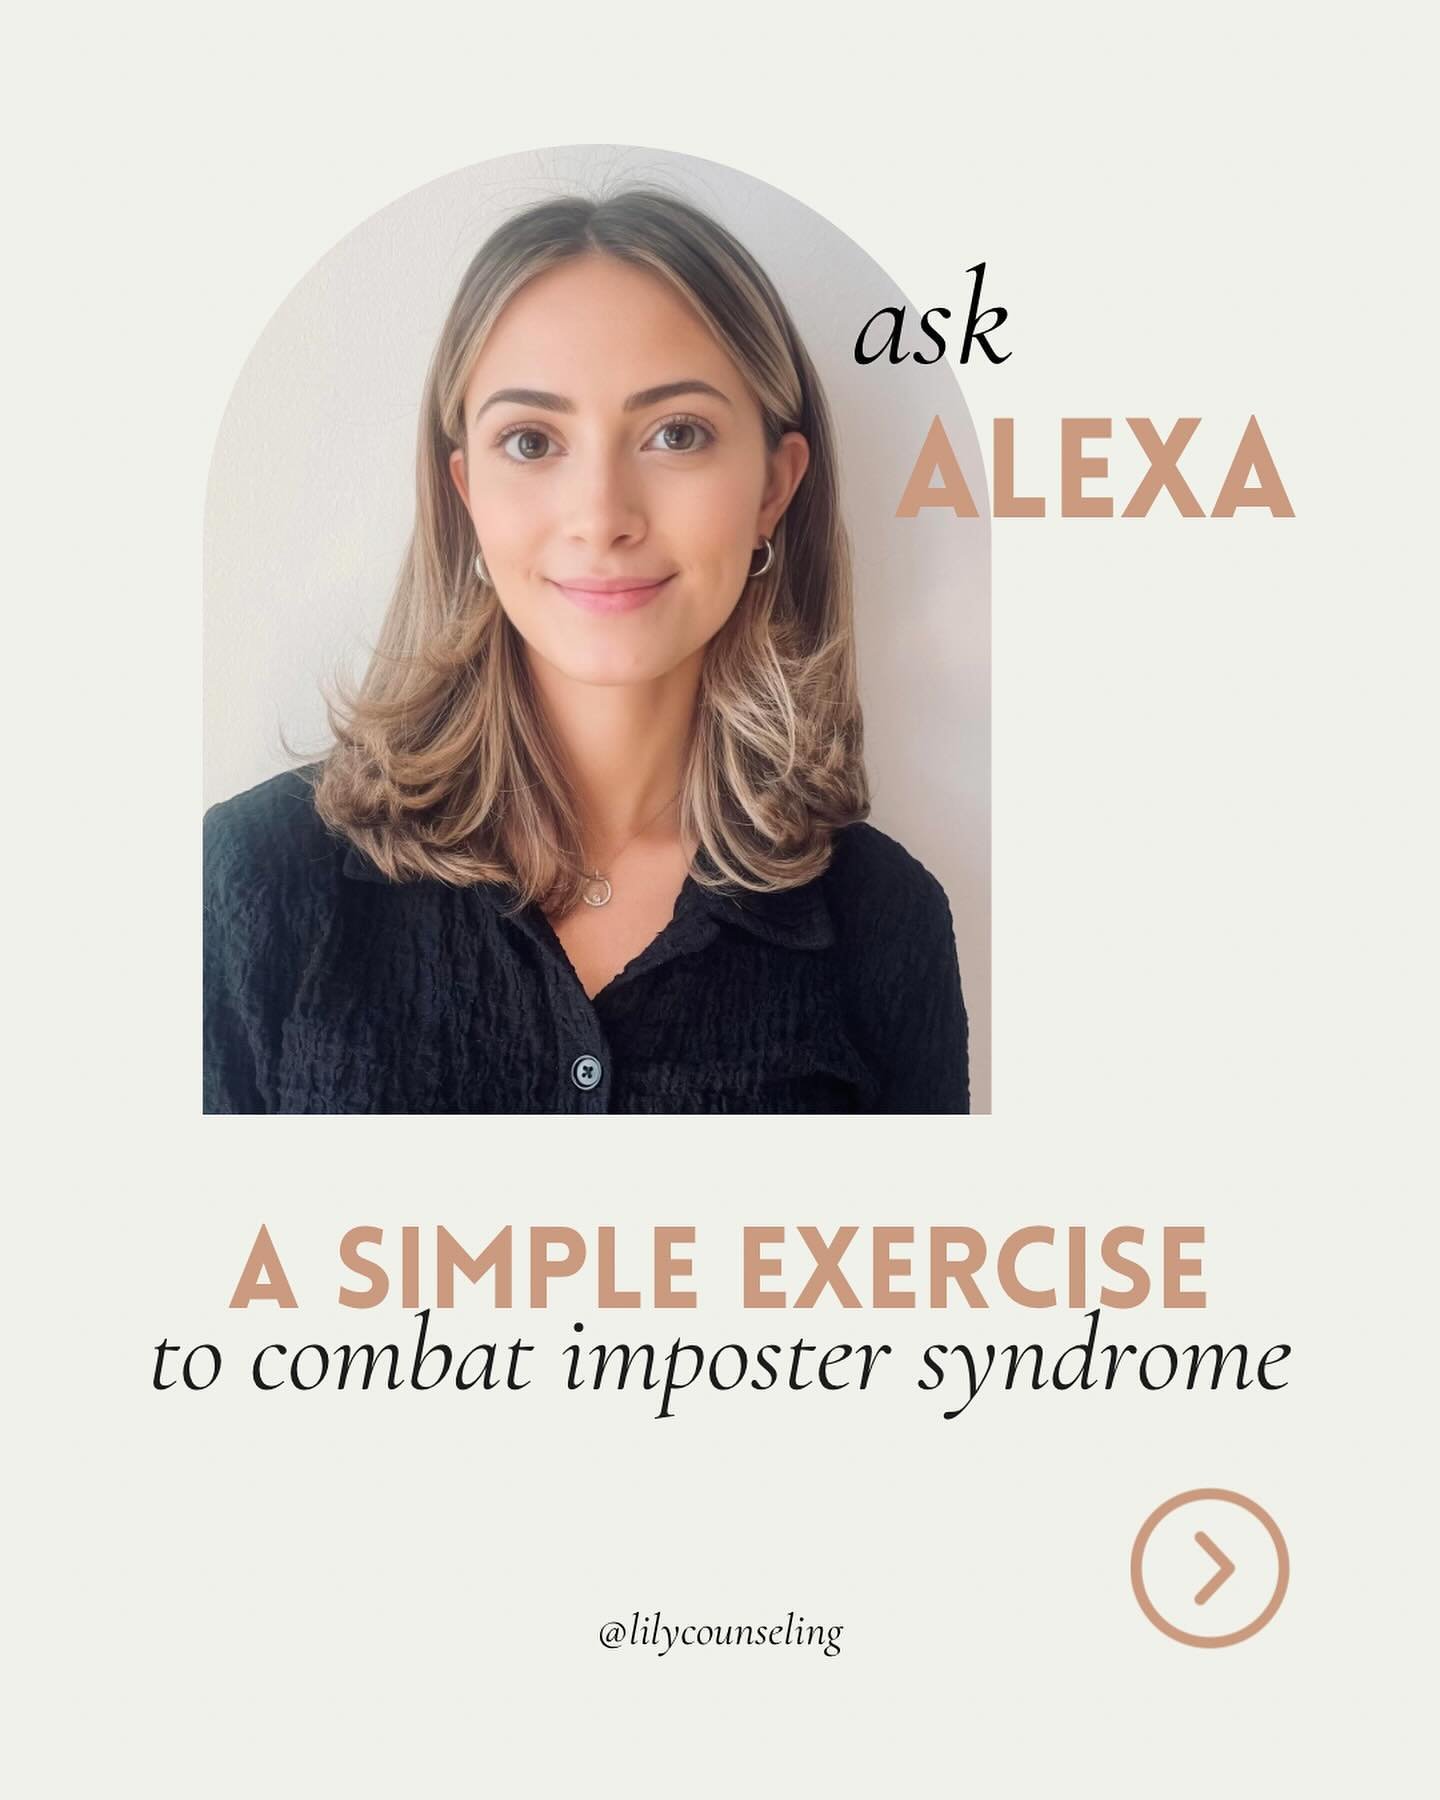 We all suffer from some imposter syndrome from time to time. 

Alexa shares her secret for combatting it! What do you think? 🤔 

.
#lilycounseling #impostersyndrome #mentalhealth #wellness #chicagotherapy #therapistsinchicago #therapyforwomen #coach